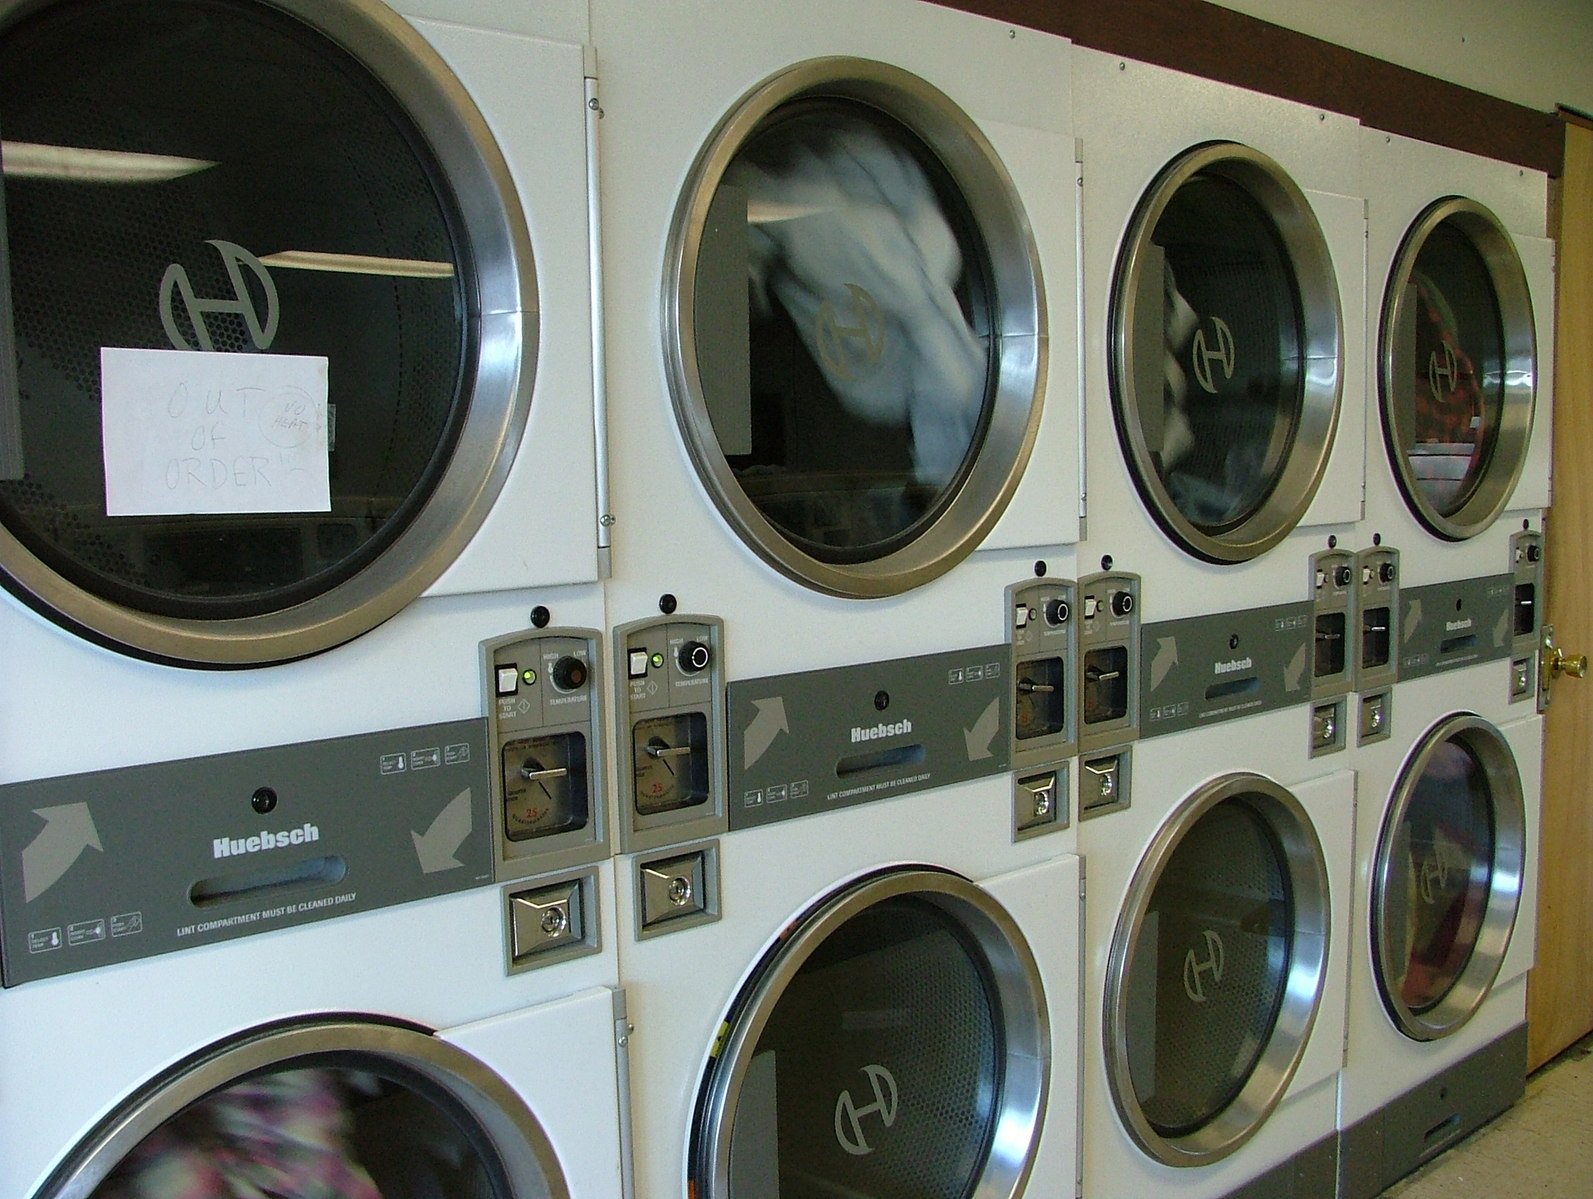 a bunch of washing machines are seen in the foreground